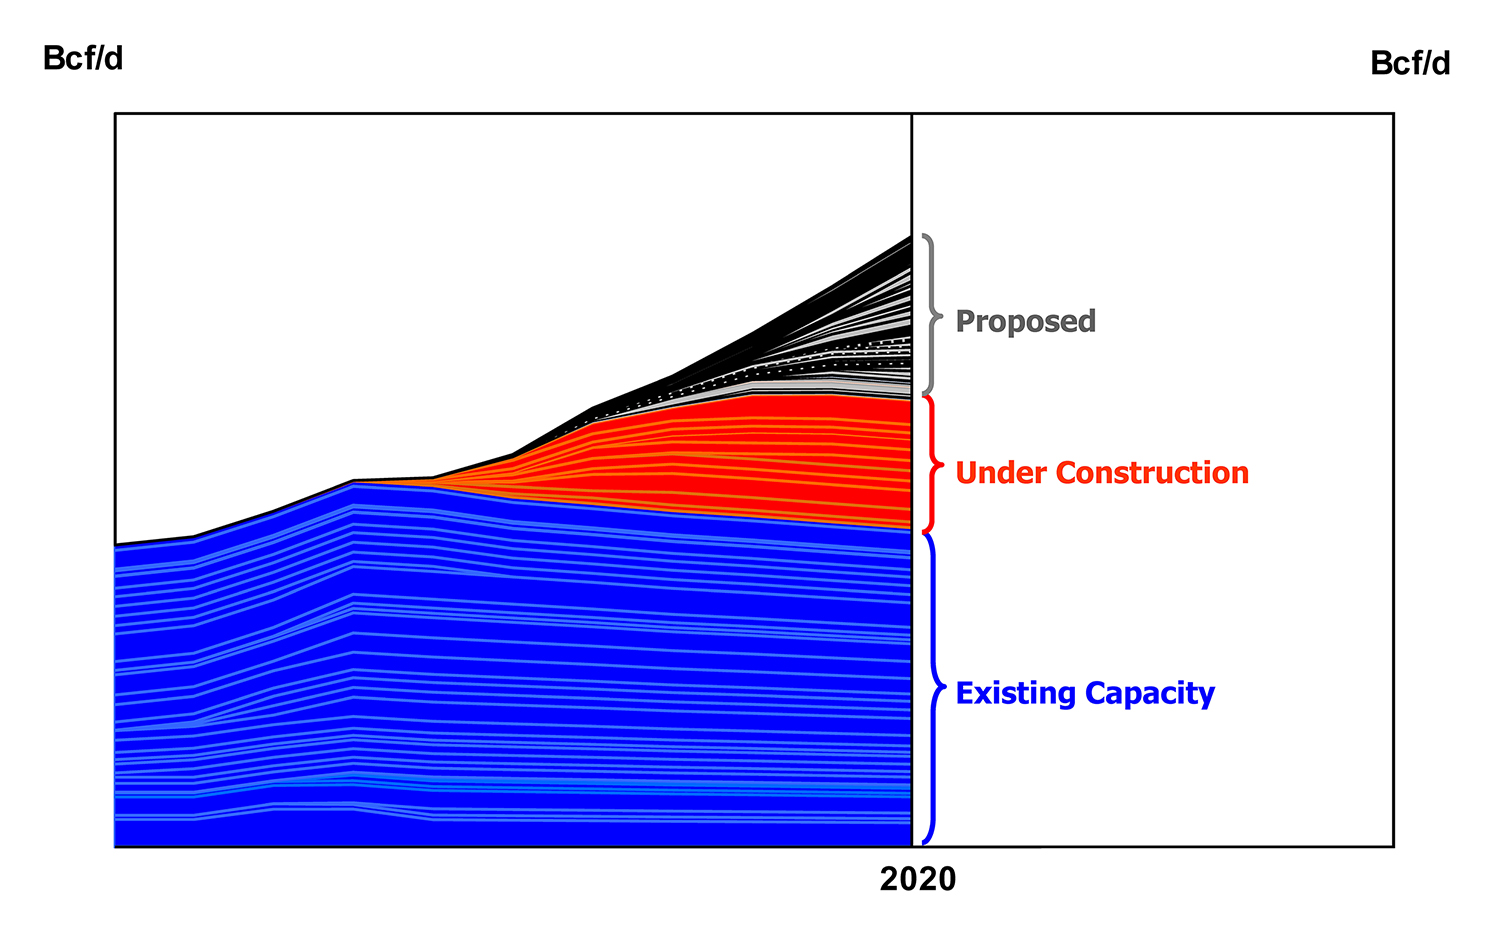 Figure 1. Global LNG supply by project development phase